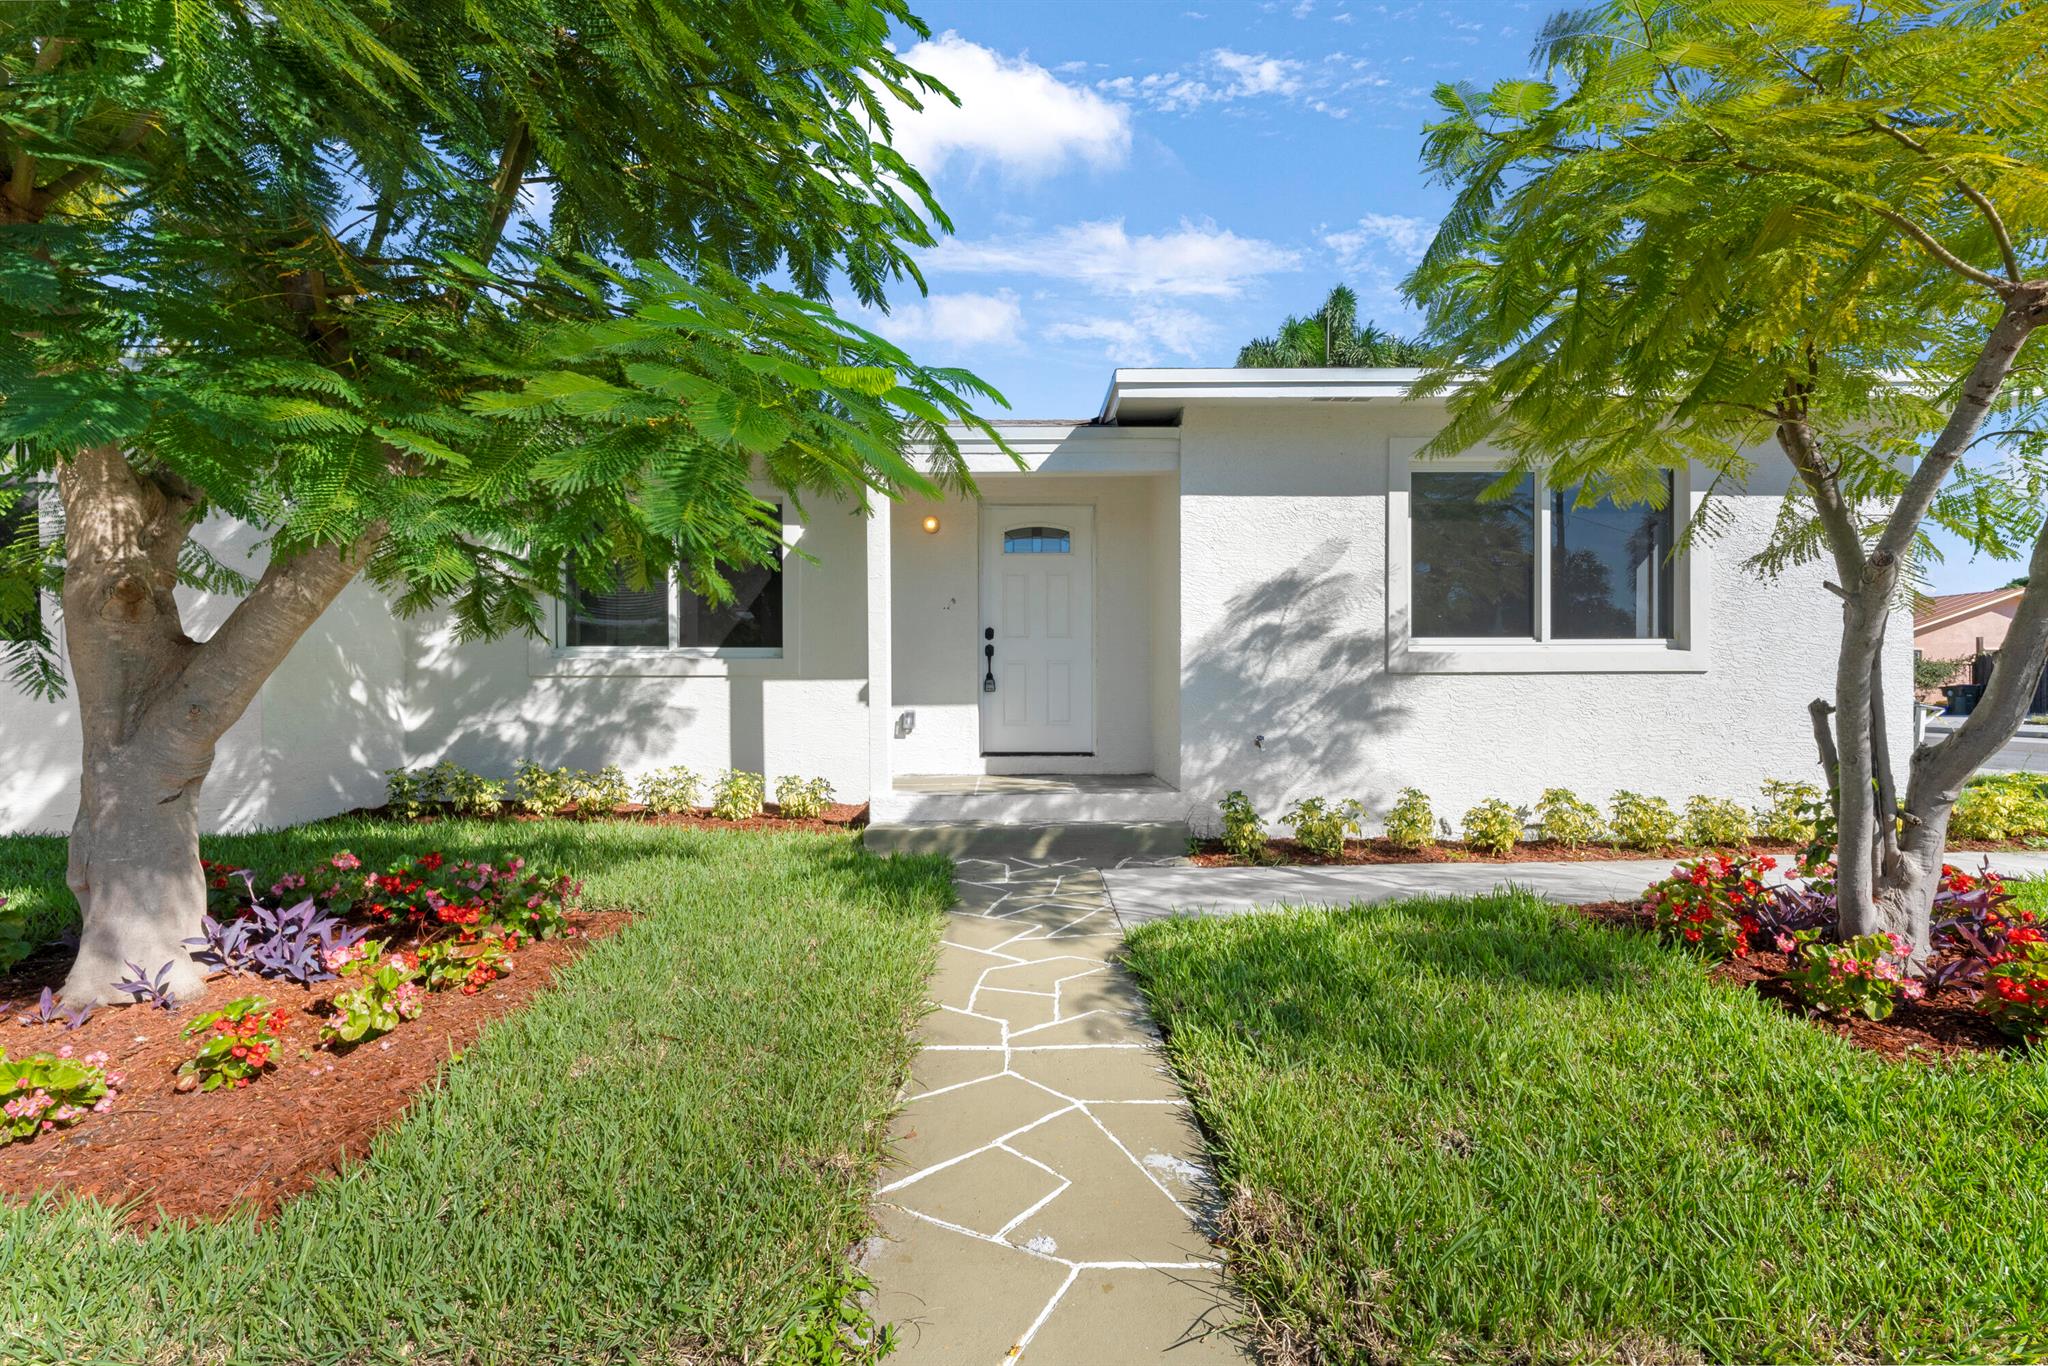 Conveniently located in a quiet neighborhood in Lake Worth, this 3-bedroom, 2-bathroom home has been completely remodeled with high quality accents and finishings, including new flooring and impact windows throughout. The kitchen features quartz countertops, brand-new stainless-steel appliances, and a large peninsula that can accommodate up to three counter chairs. It opens to the light and bright living room, which leads to the completely remodeled master suite and two additional bedrooms. With a brand-new roof, water heater and paved driveway with space for multiple cars, this single-family South Florida retreat is move-in ready and conveniently located close to local restaurants, shopping and entertainment.